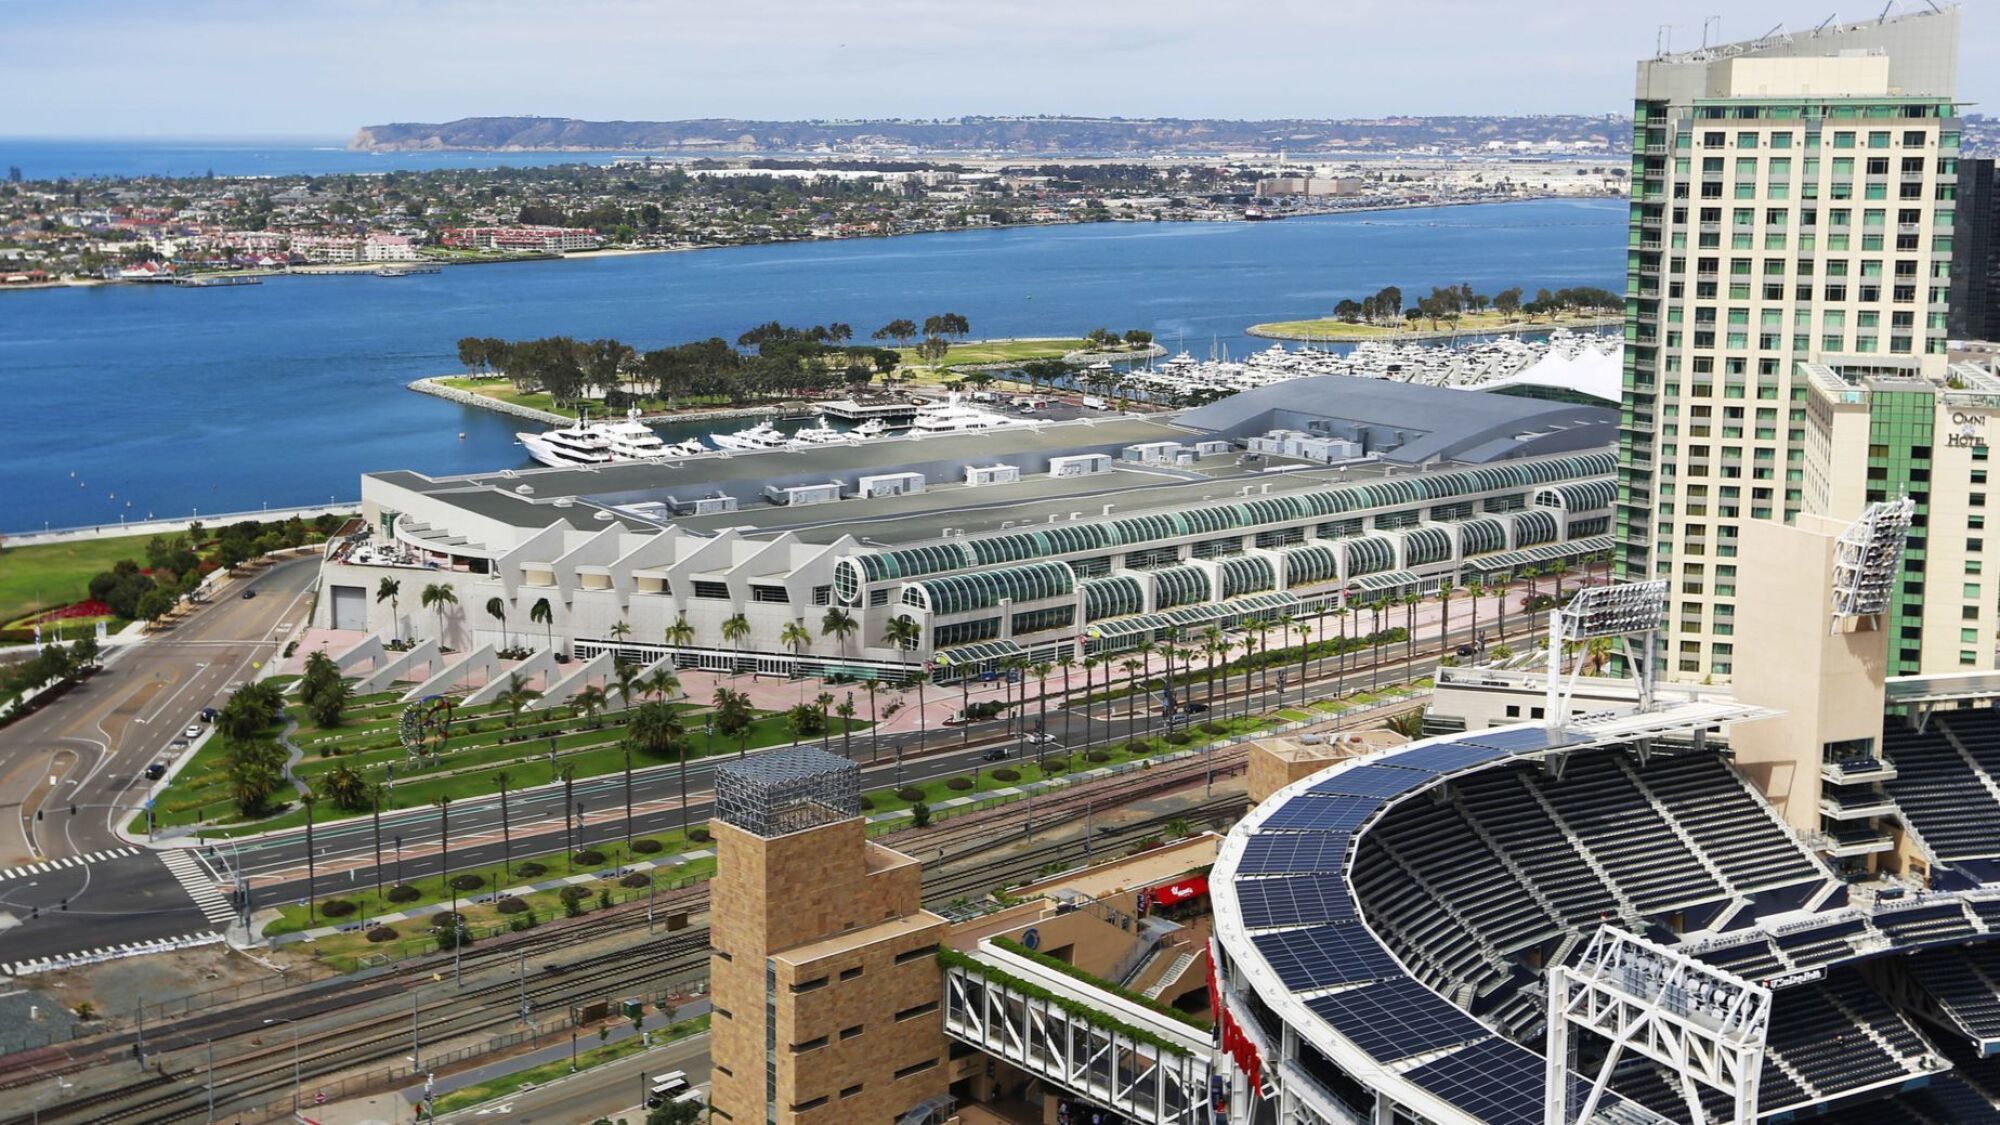 A view of the San Diego Convention Center